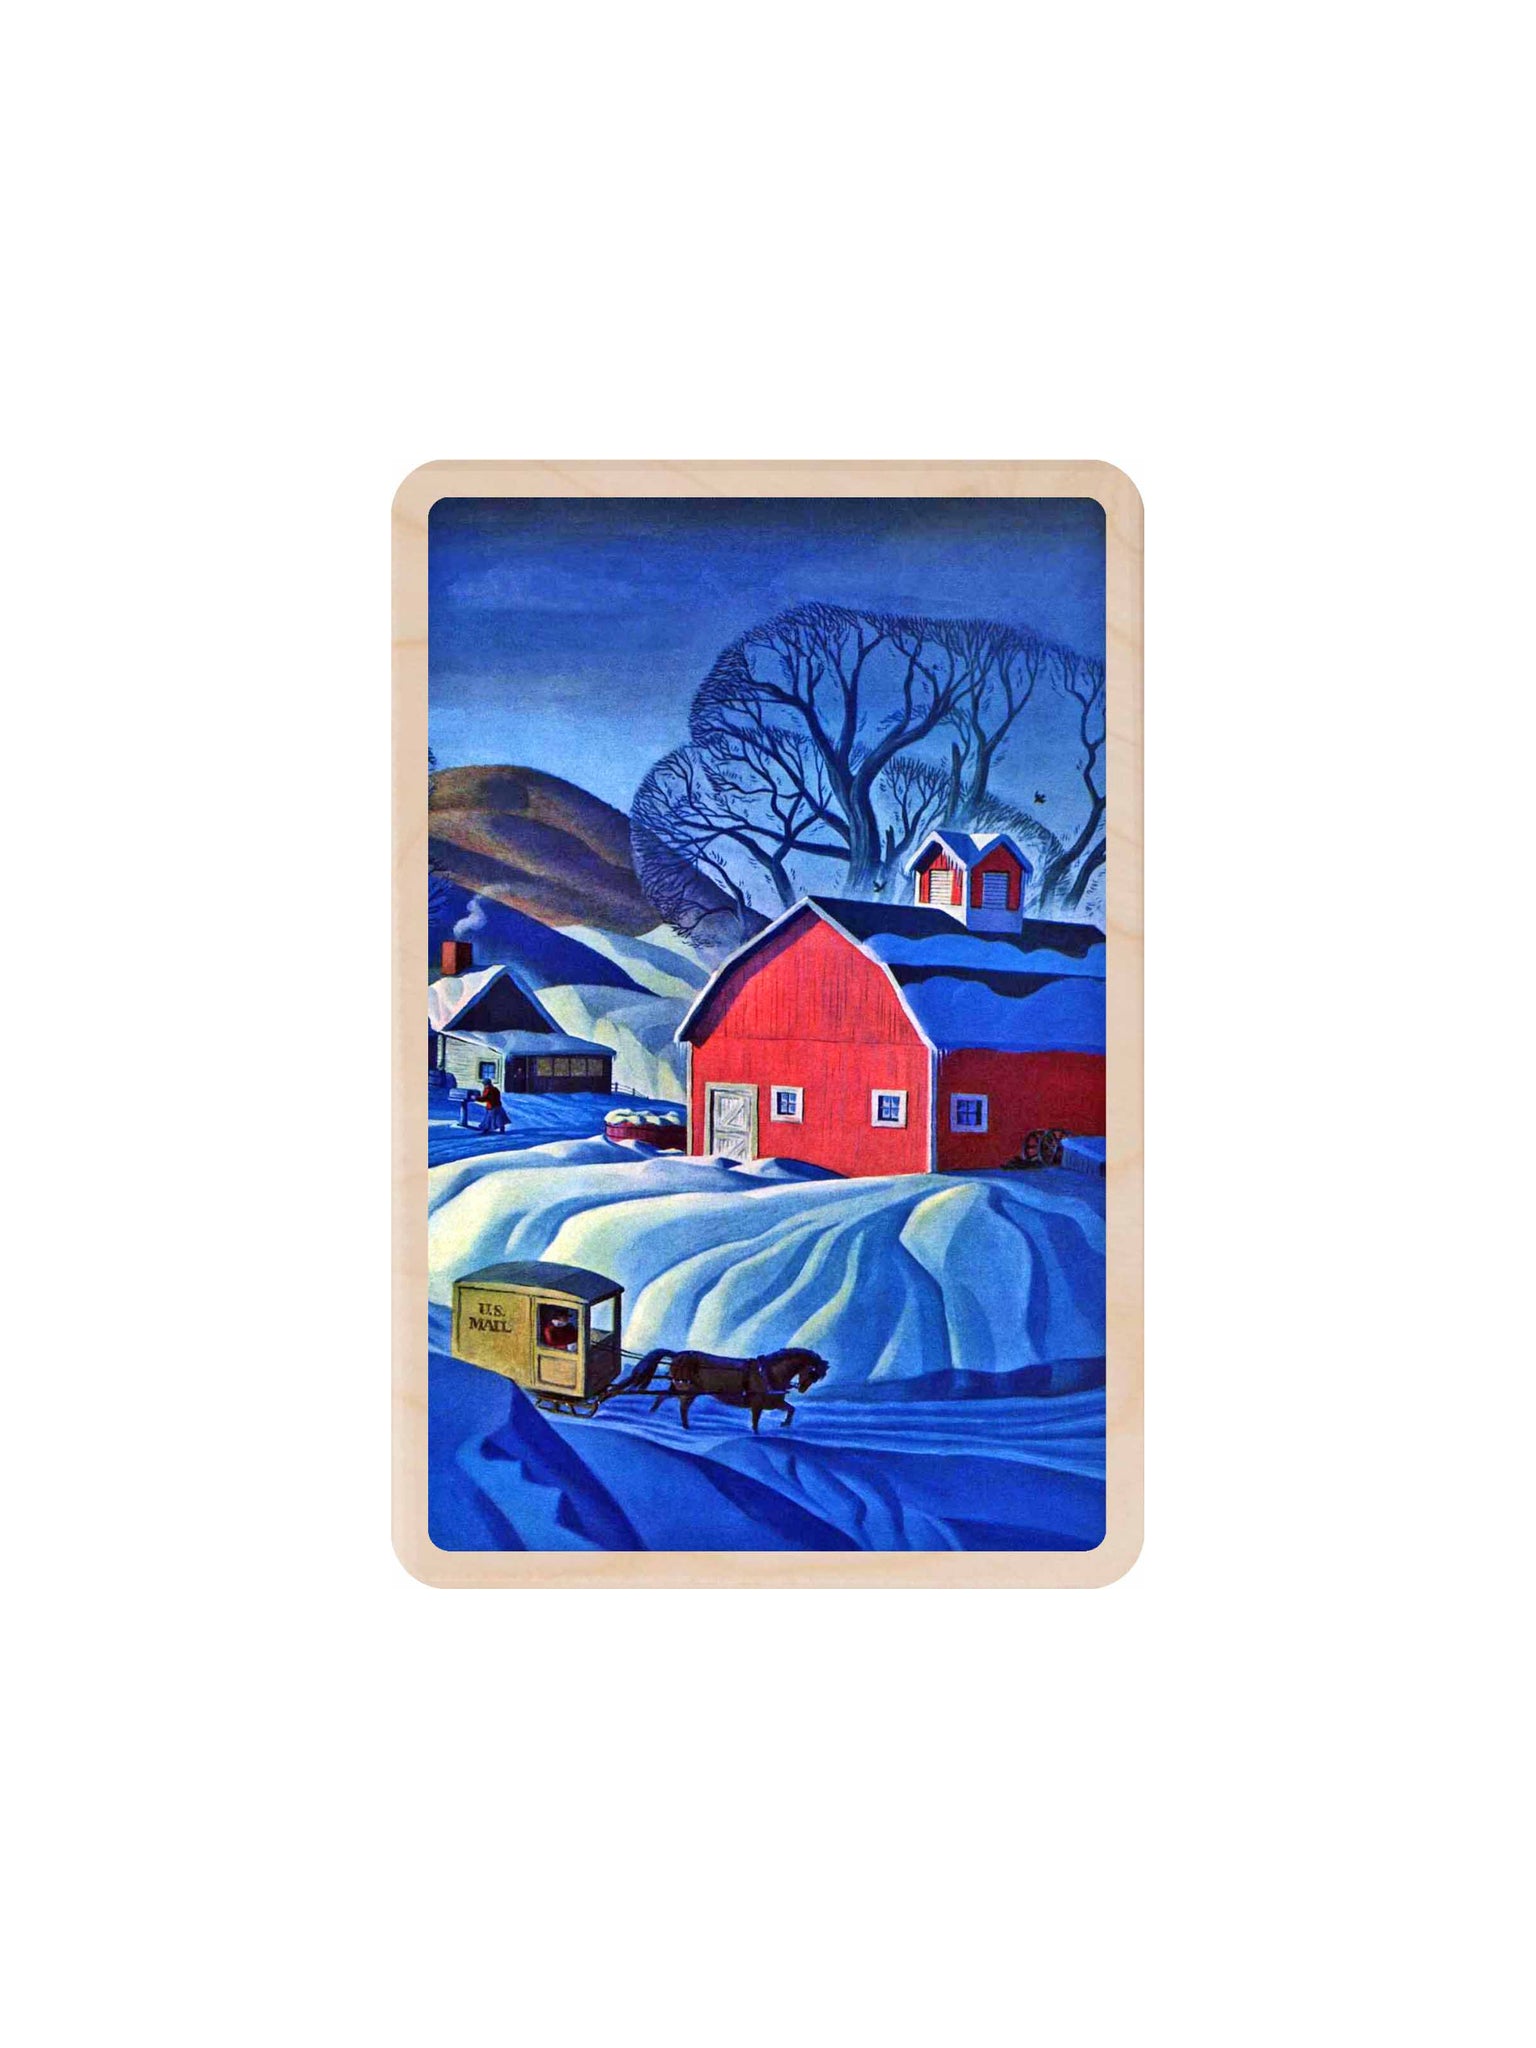 Red Barn in Snow Wooden Postcard Weston Table